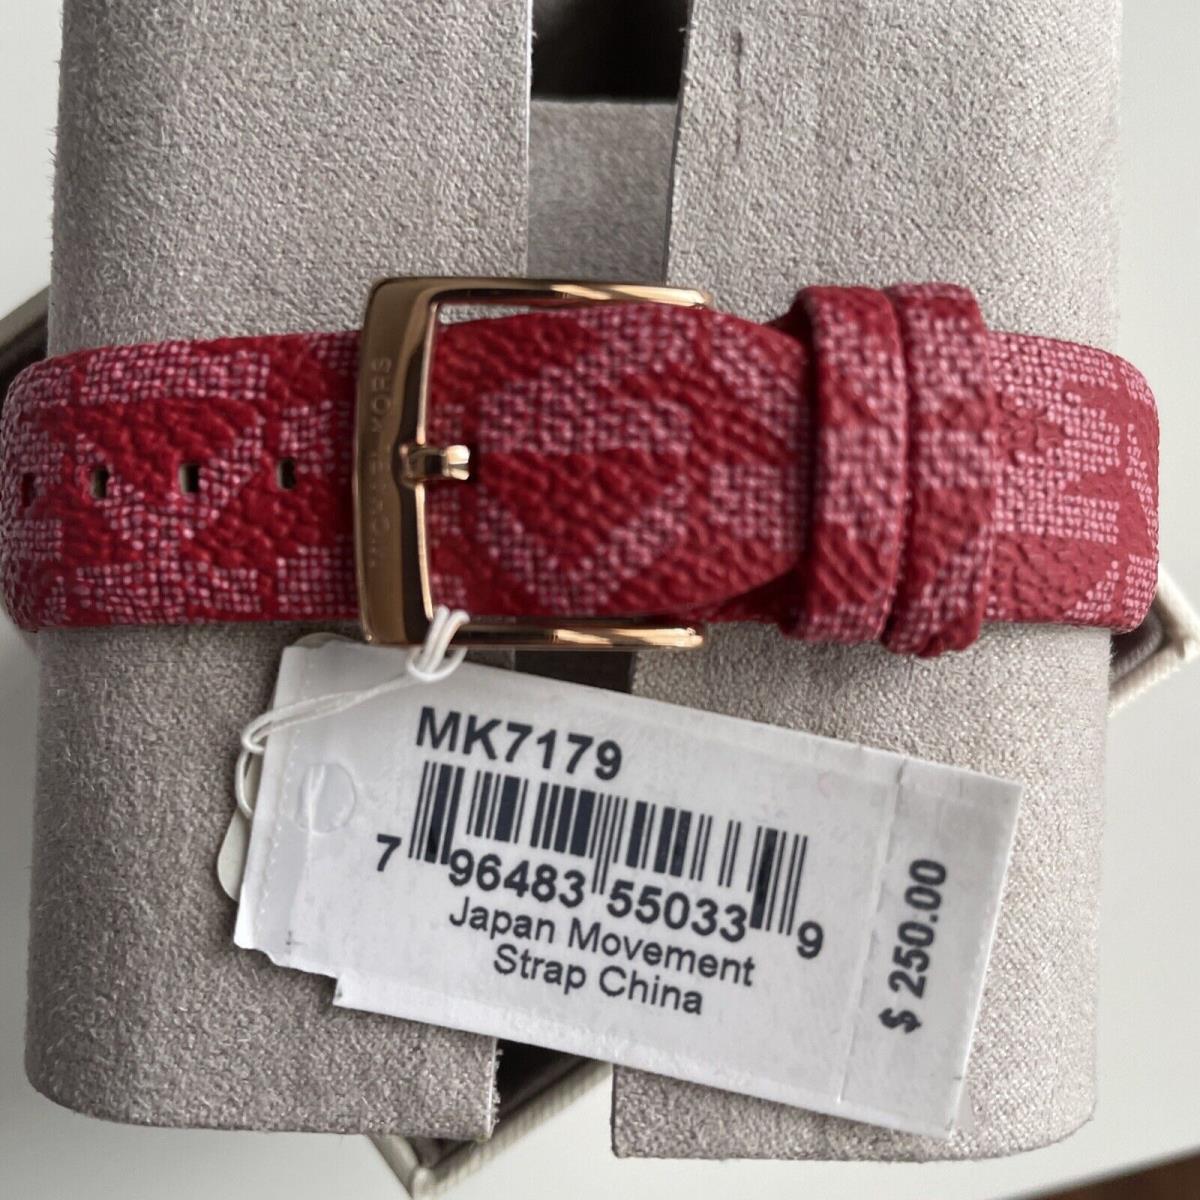 Michael Kors Women’s Quartz Red Leather Strap Red Dial 40mm Watch MK7179